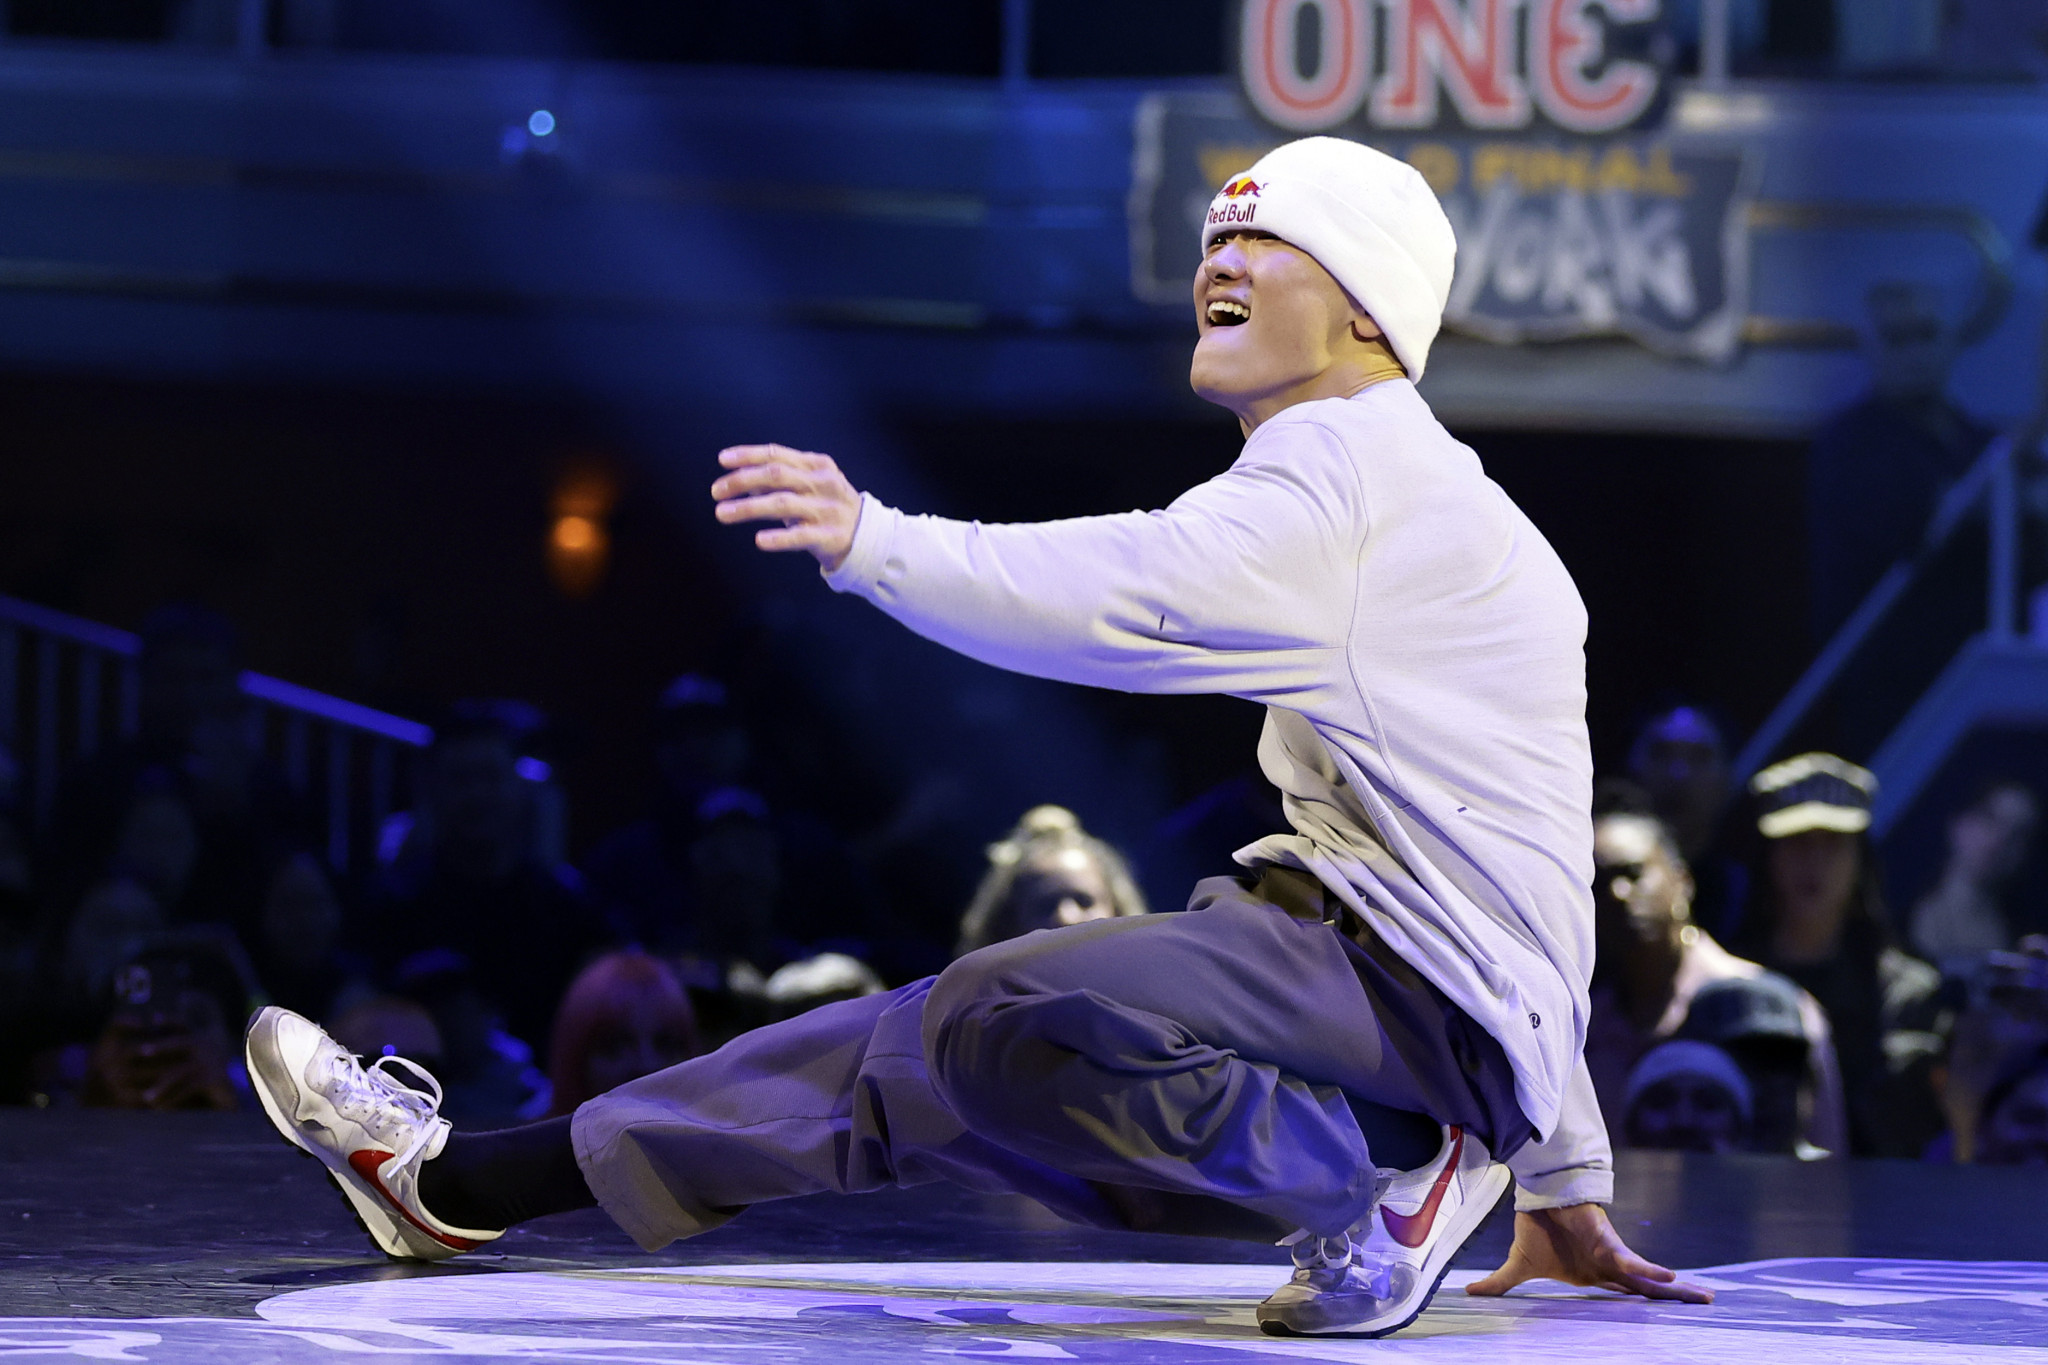 Philip Kim, or Phil Wizard, won the b-boys title in Santiago ©Getty Images